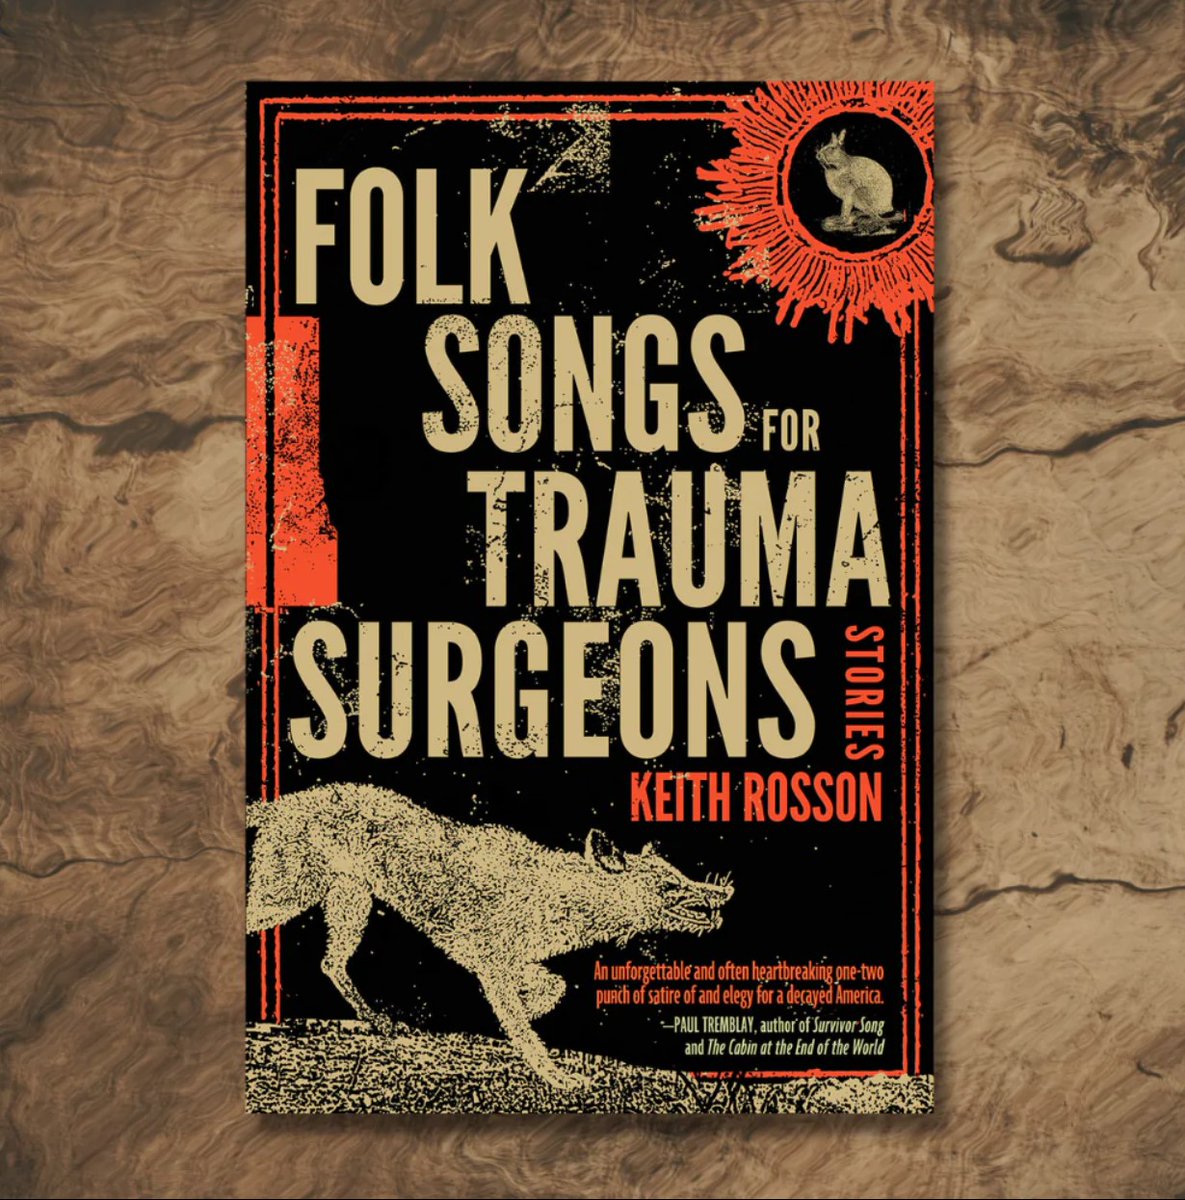 That Day @Keith_Rosson's #FolkSongsForTraumaSurgeons won the Shirley Jackson Award for best collection. Over. The. Moon. Superb Speculative Fiction. This just went into a new printing and we are stoked.

smpl.is/3fly

@shirleyjawards #darkfiction #magicalrealism